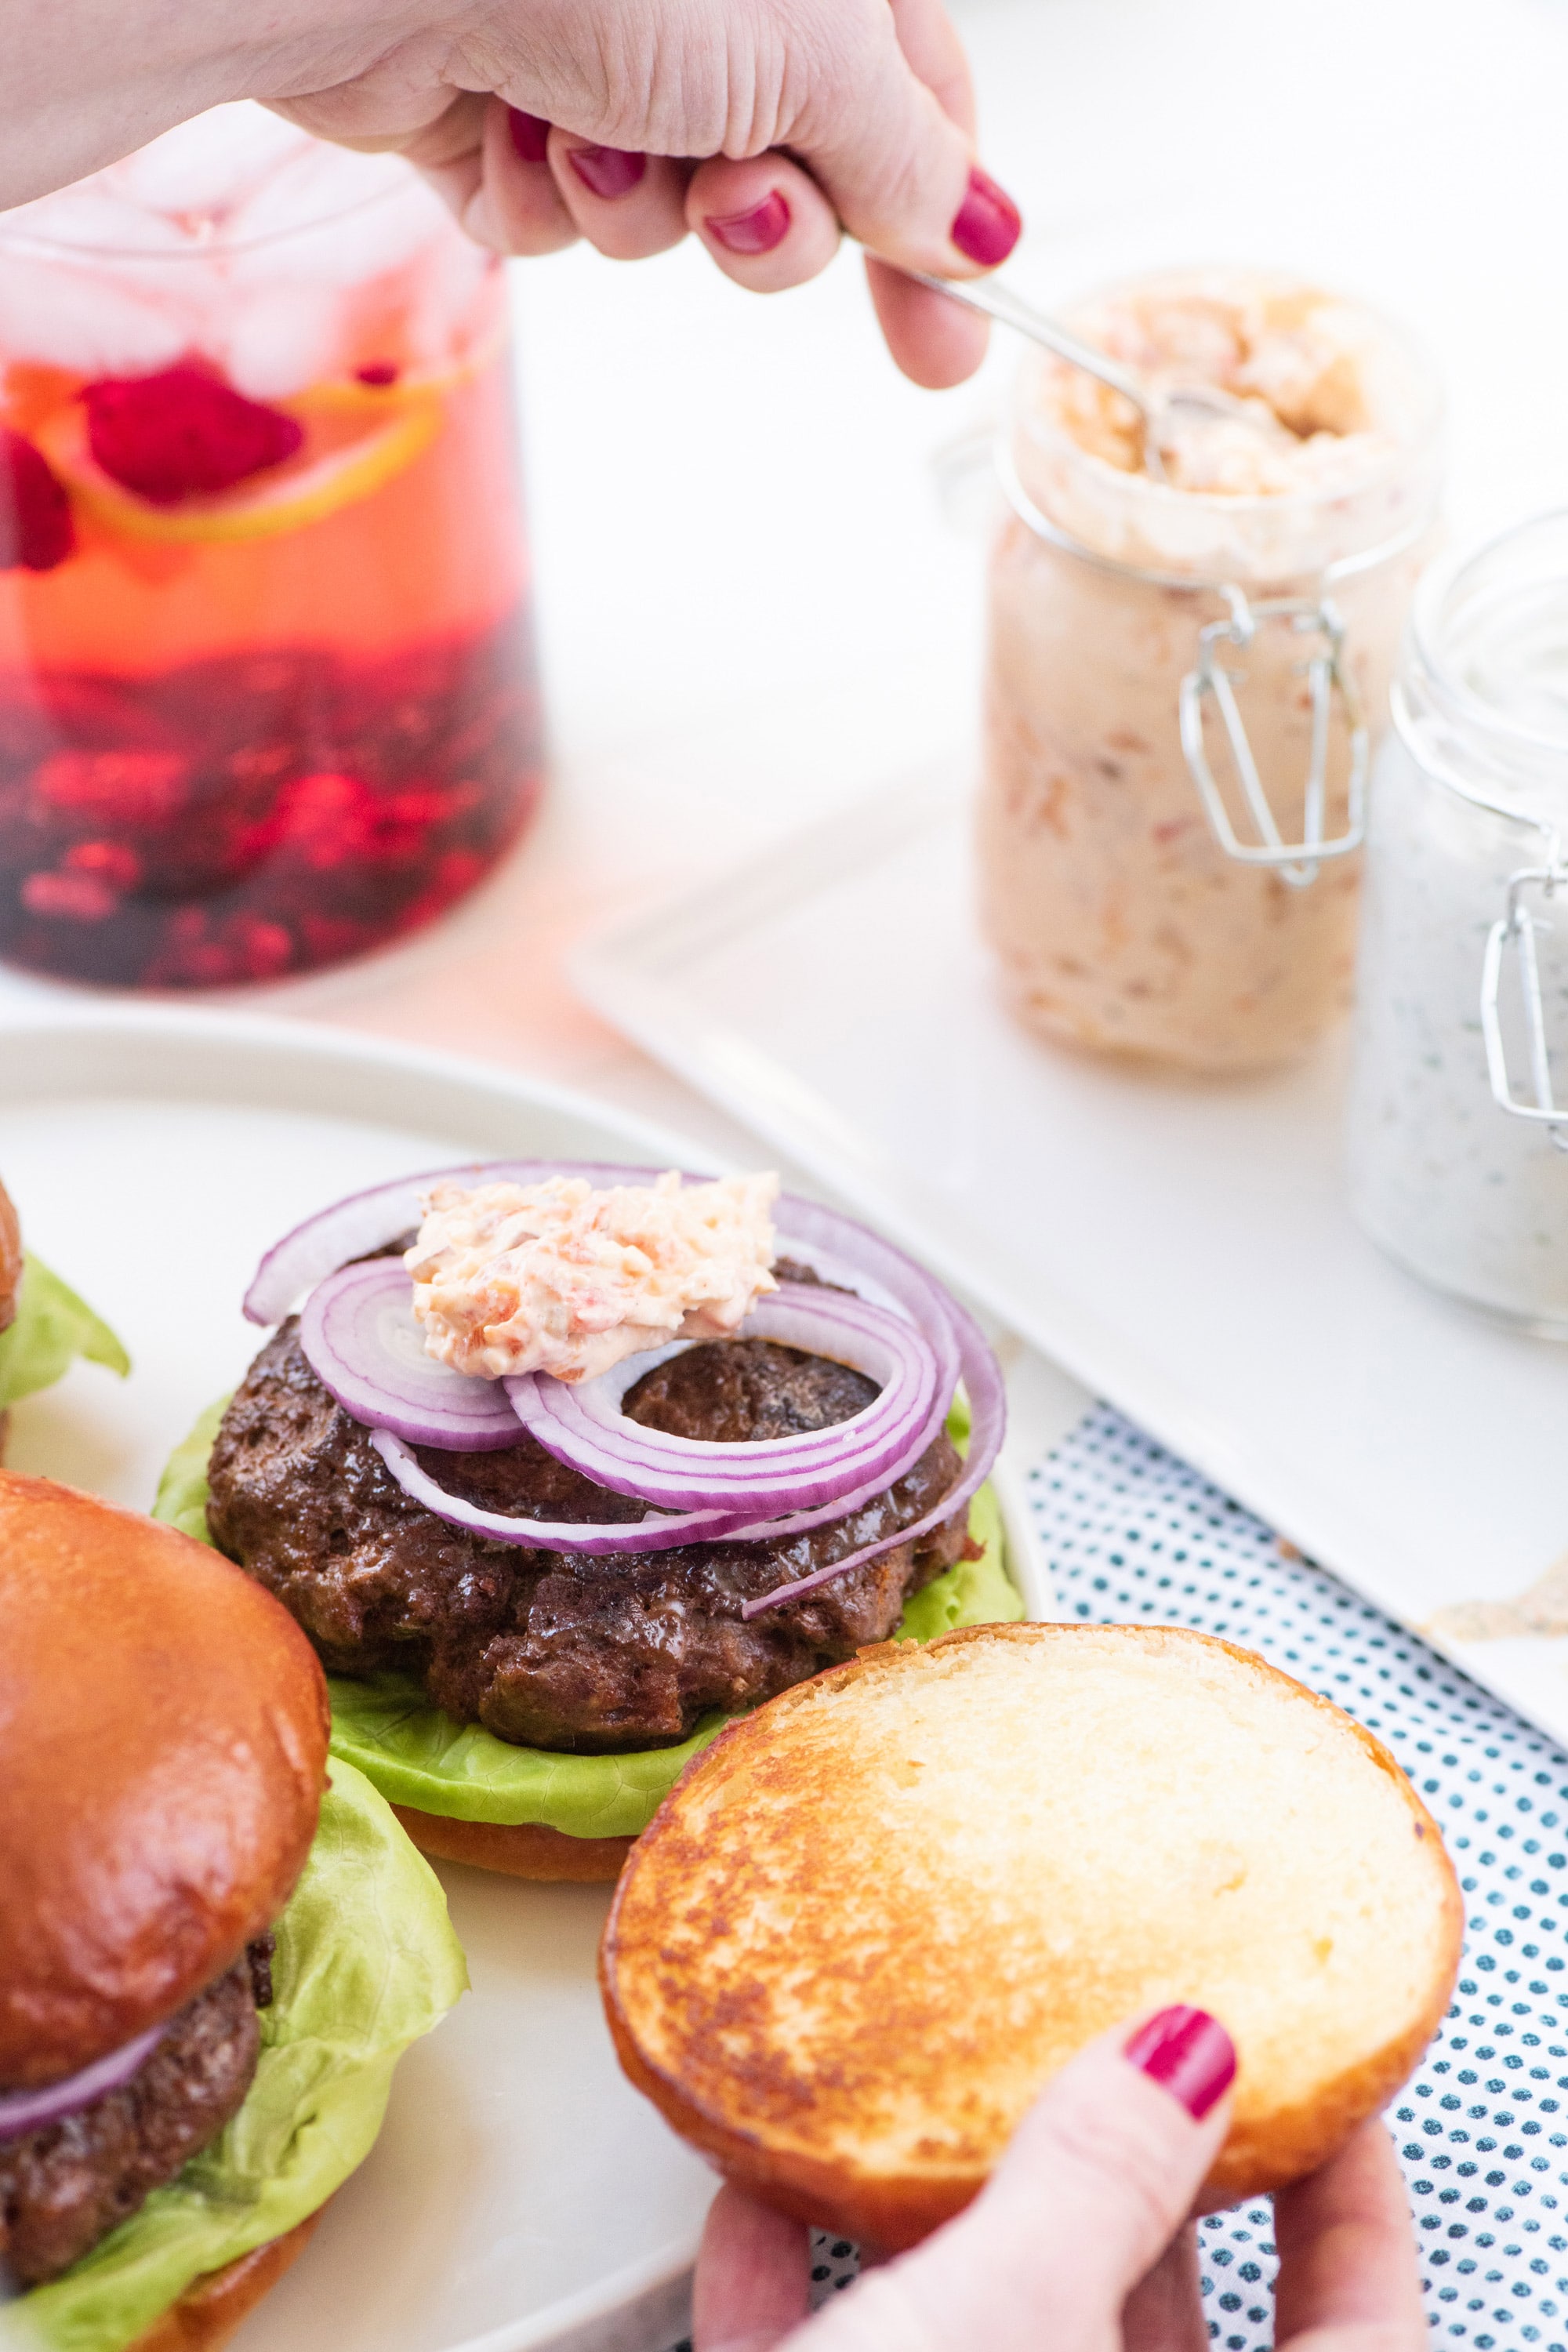 Woman scooping pimento cheese spread from glass jar onto burger.